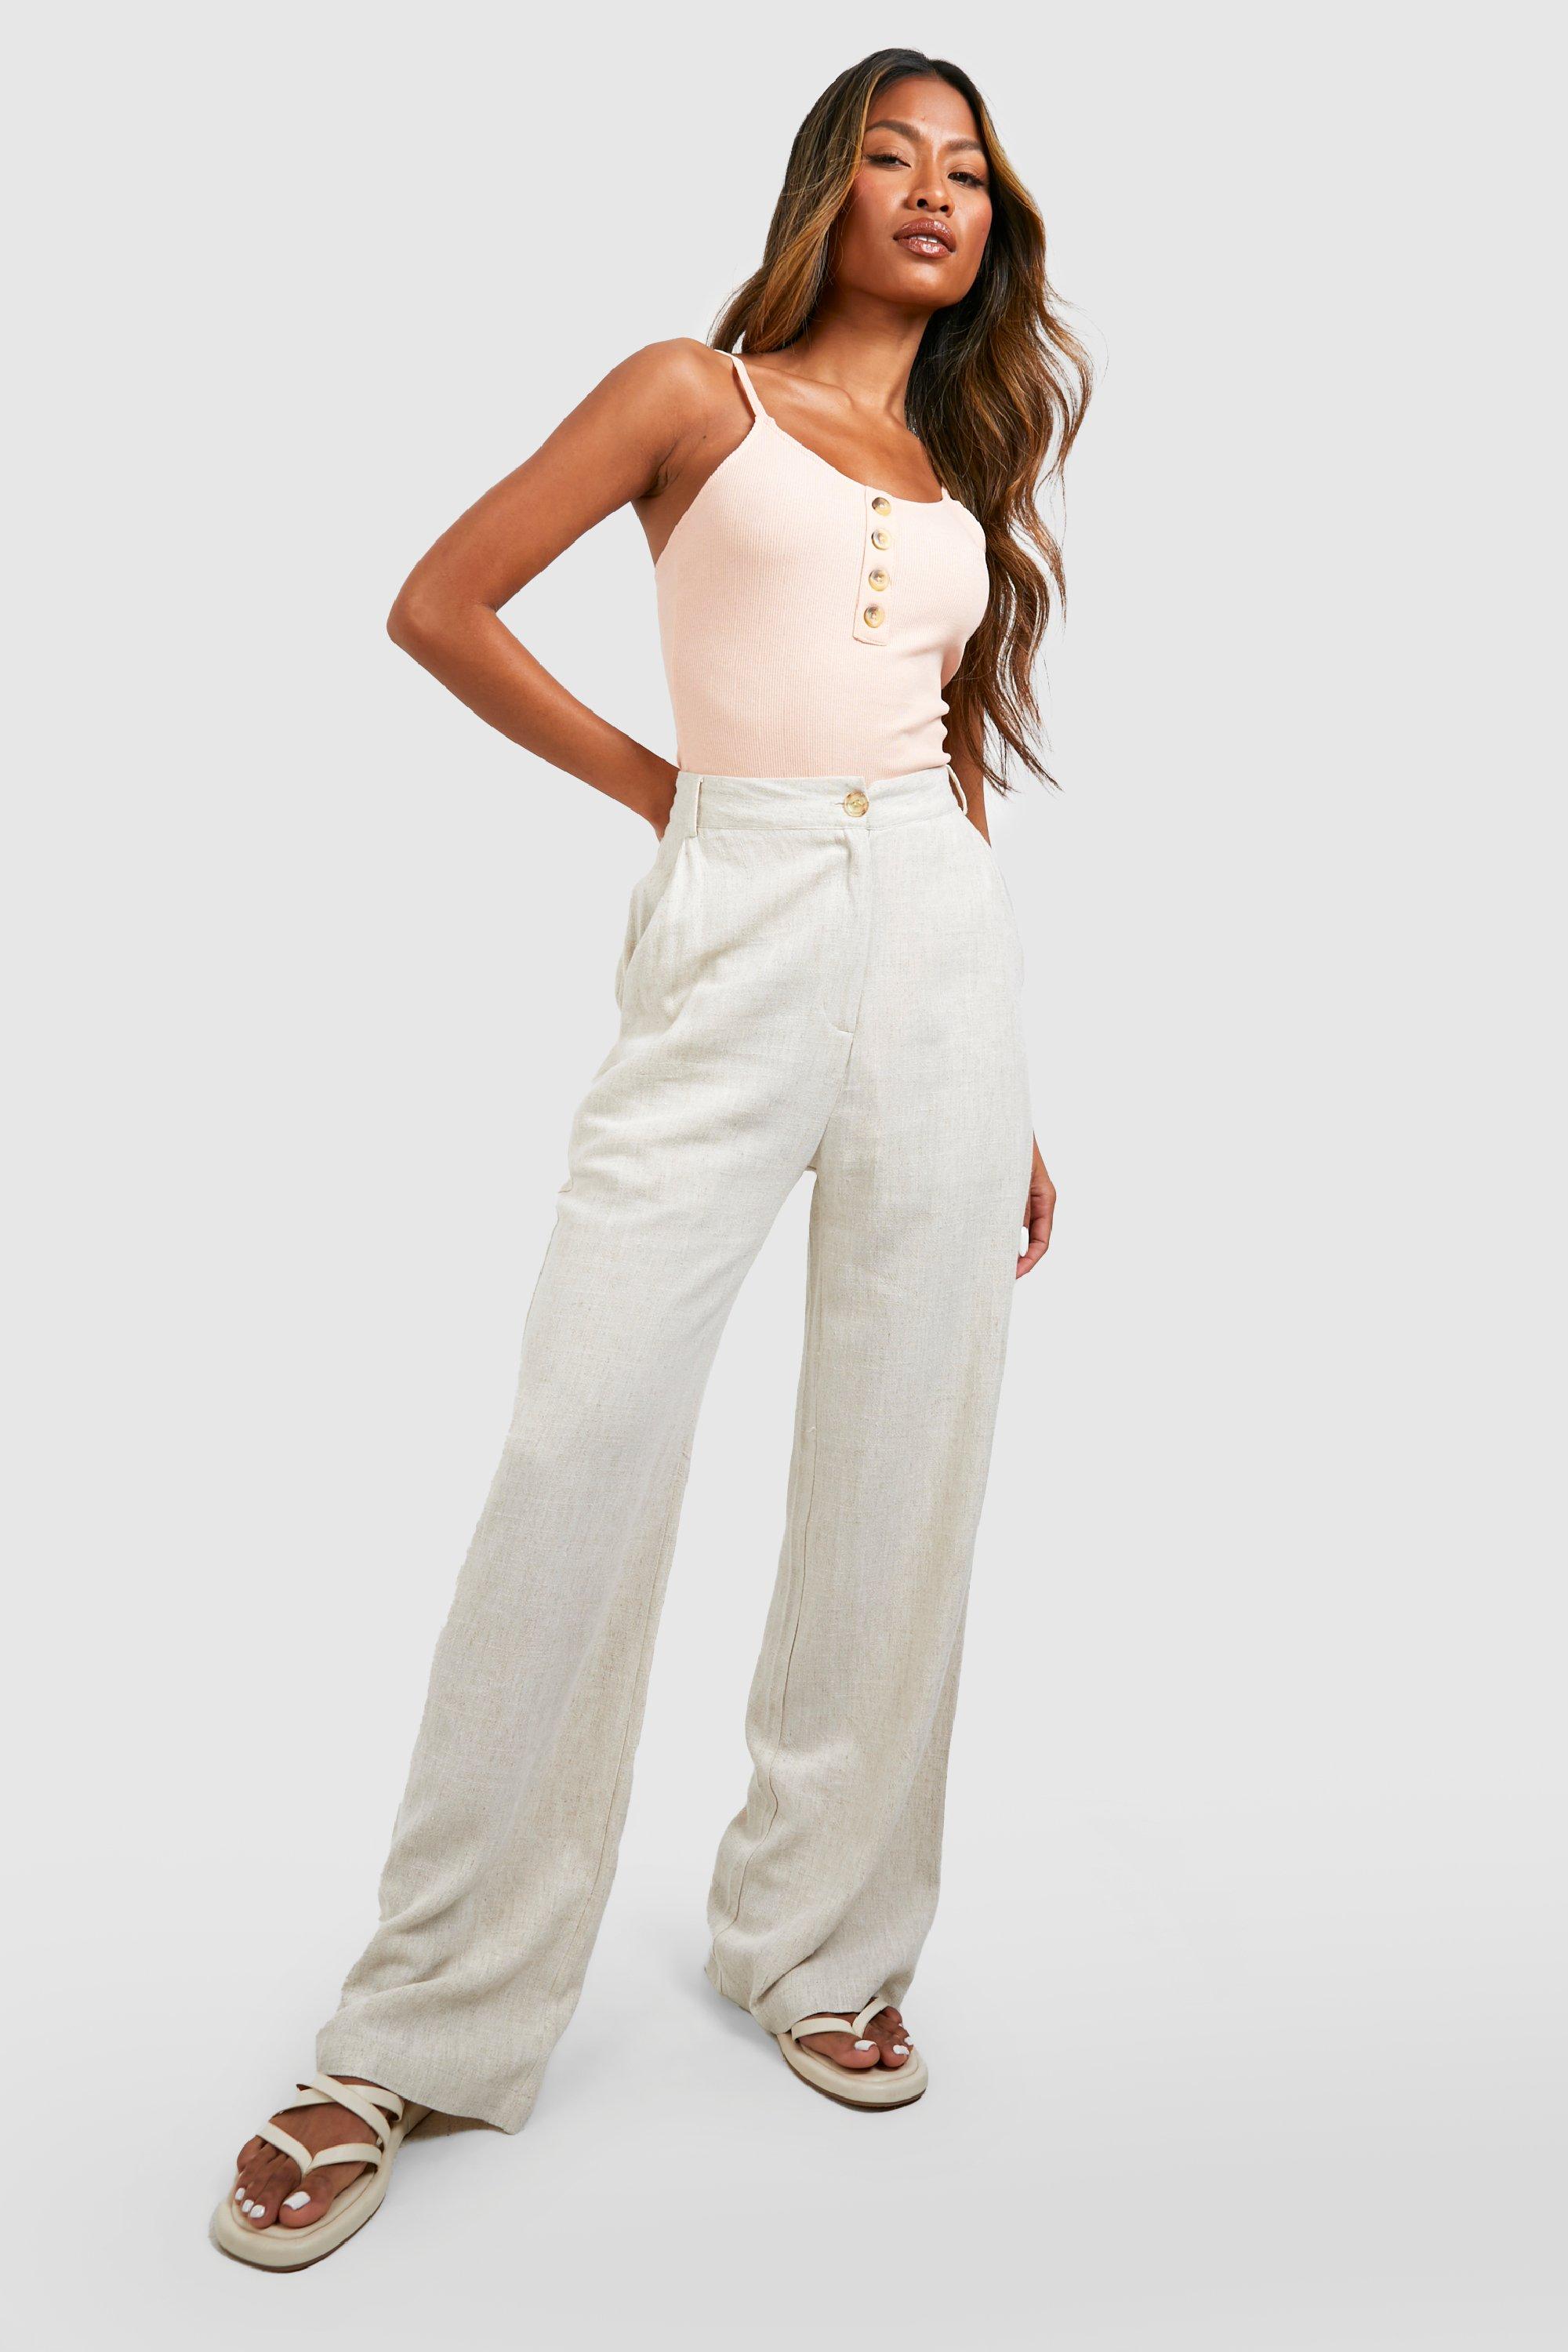 Button Down Detail Strappy Ribbed Bodysuit